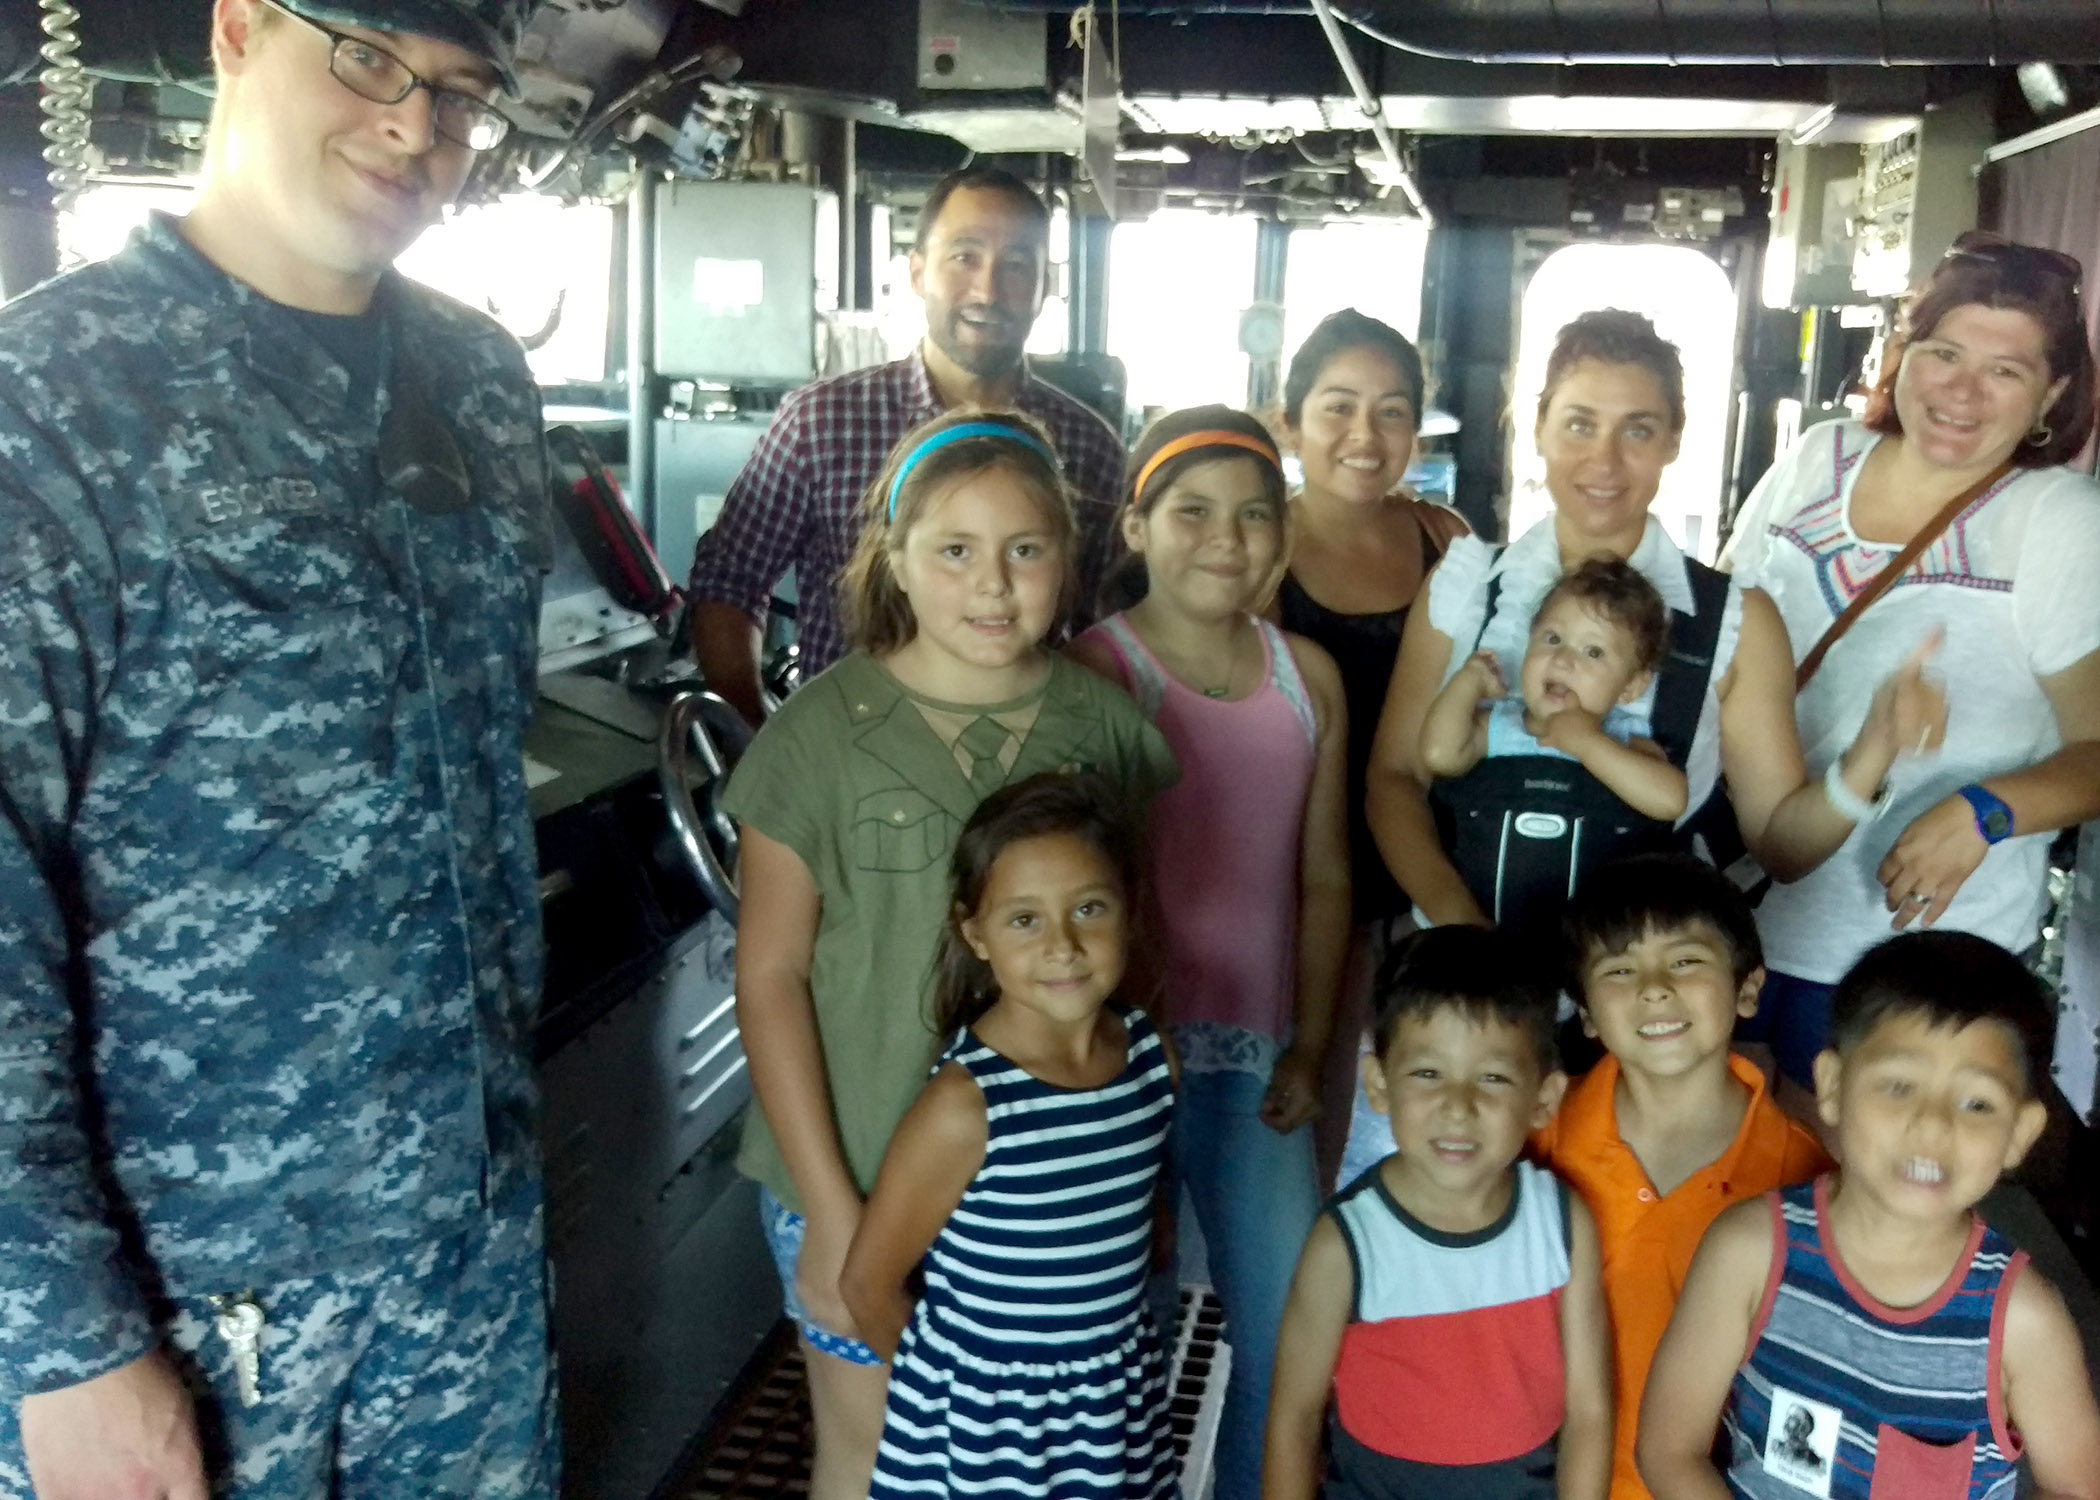 Naval Information Forces West provided a tour of the Naval Base San Diego to local students and their parents July 22.  The families belong to the Marlow B. Martinez Foundation, a local non-profit organization supporting disadvantaged children. A member of the USS Sampson DDG 102 crew took time to pose for a group photo. U.S. Navy photo by LCDR Henry A. Martinez.